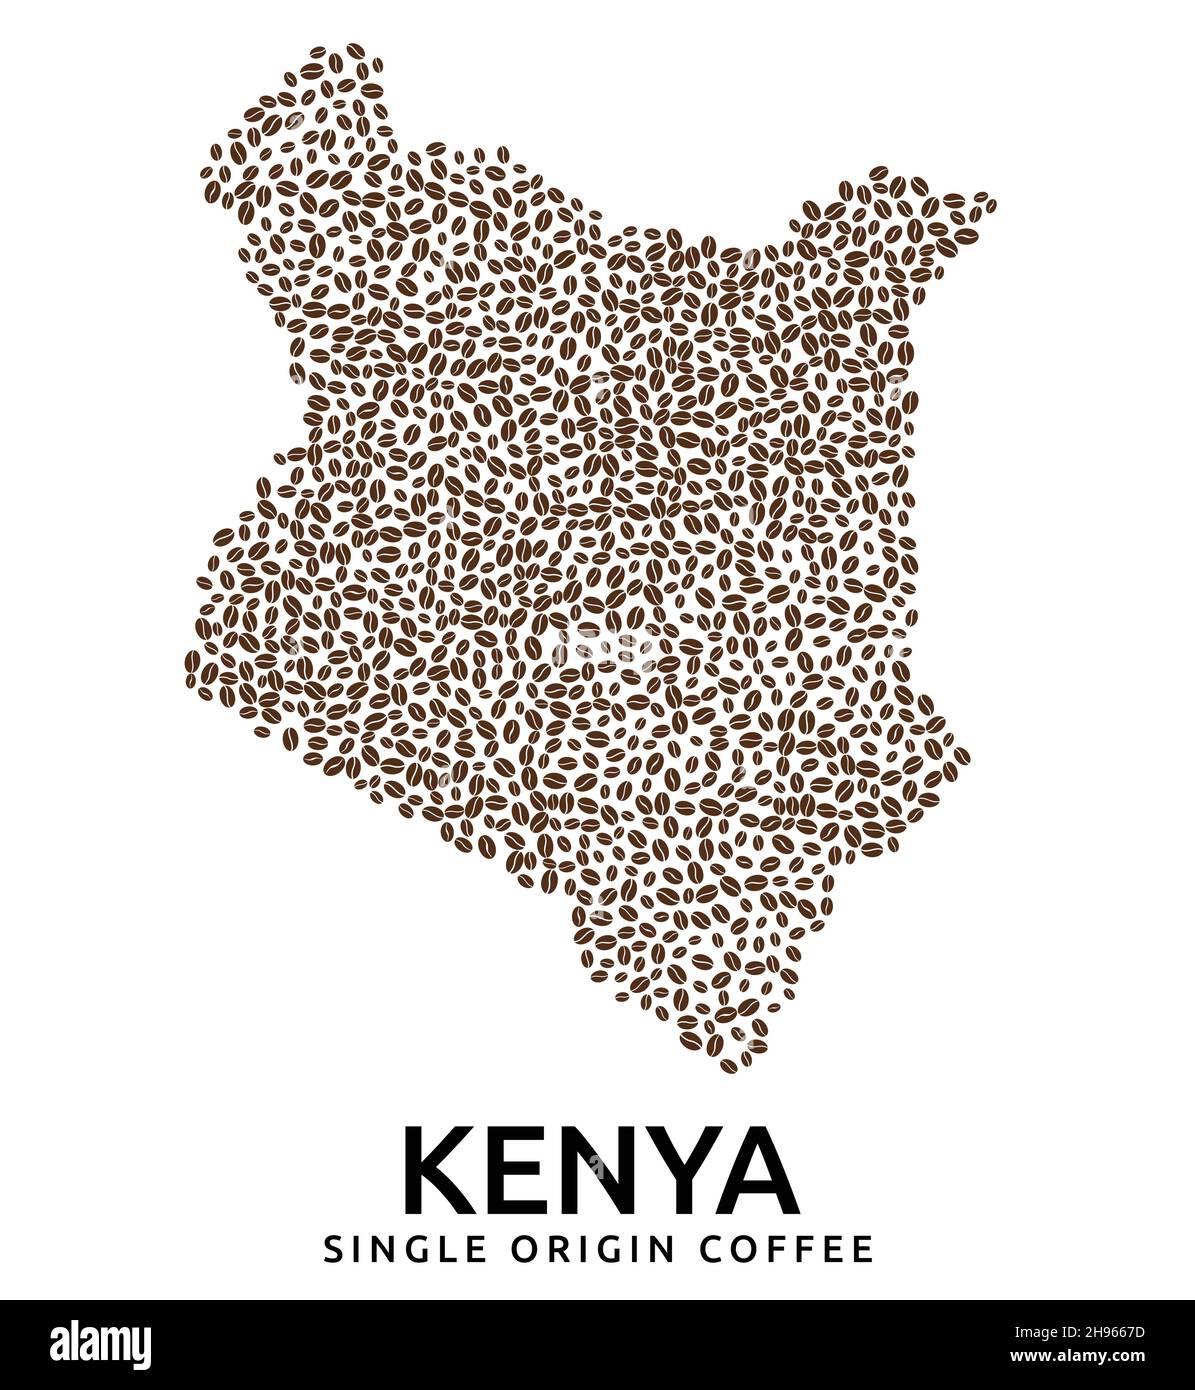 Shape of Kenya map made of scattered coffee beans, country name below Stock Vector